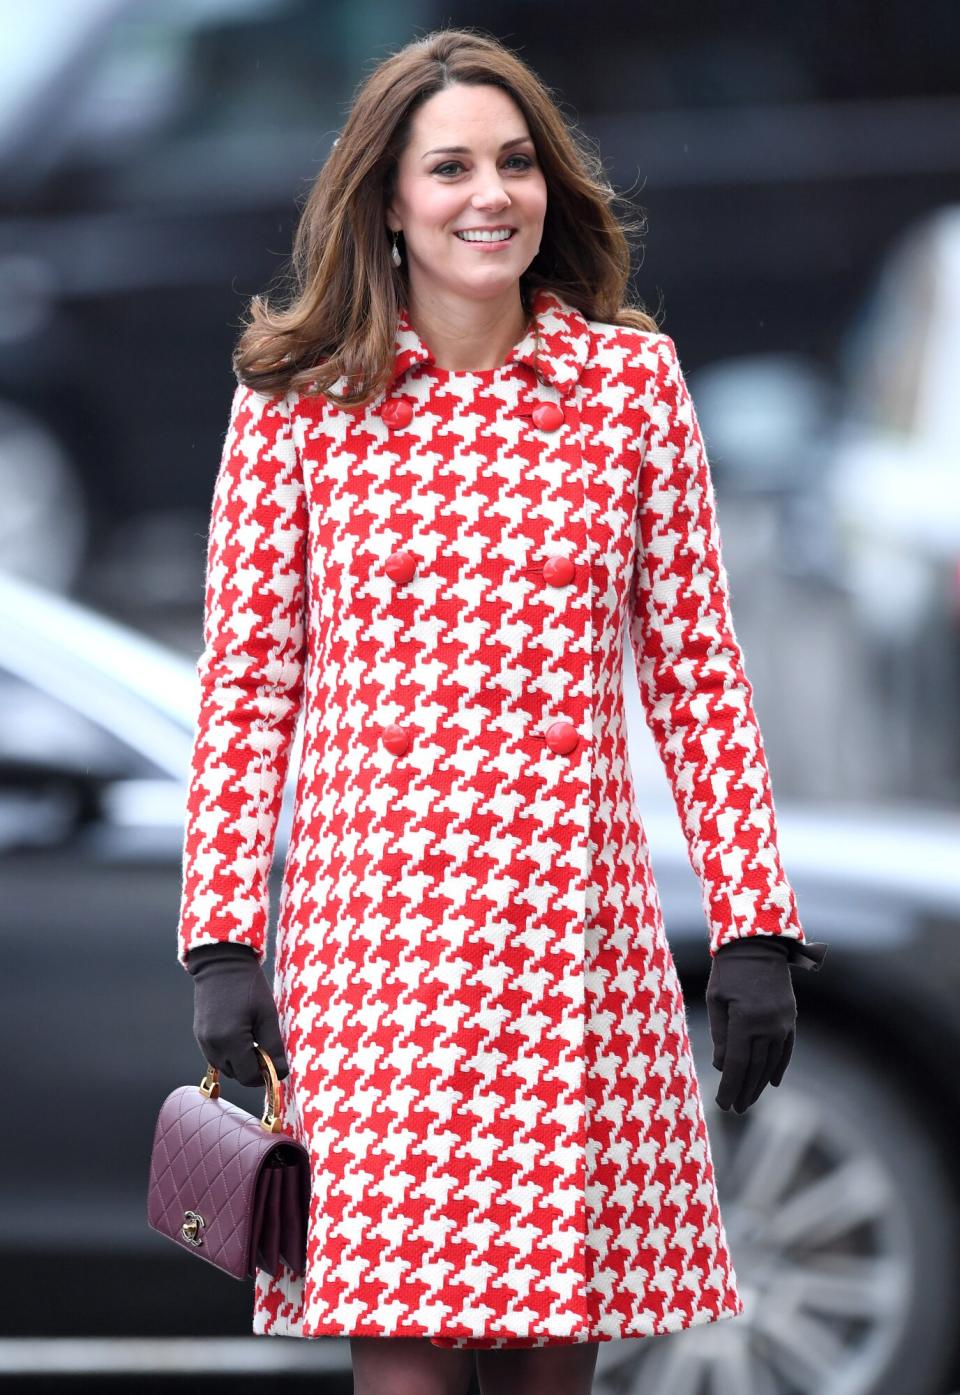 Catherine, Duchess of Cambridge visits the Karolinska Institute to meet with academics and practitioners to discuss Sweden’s approach to managing mental health challenges during day two of their Royal visit to Sweden and Norway on January 31, 2018 in Stockholm, Sweden